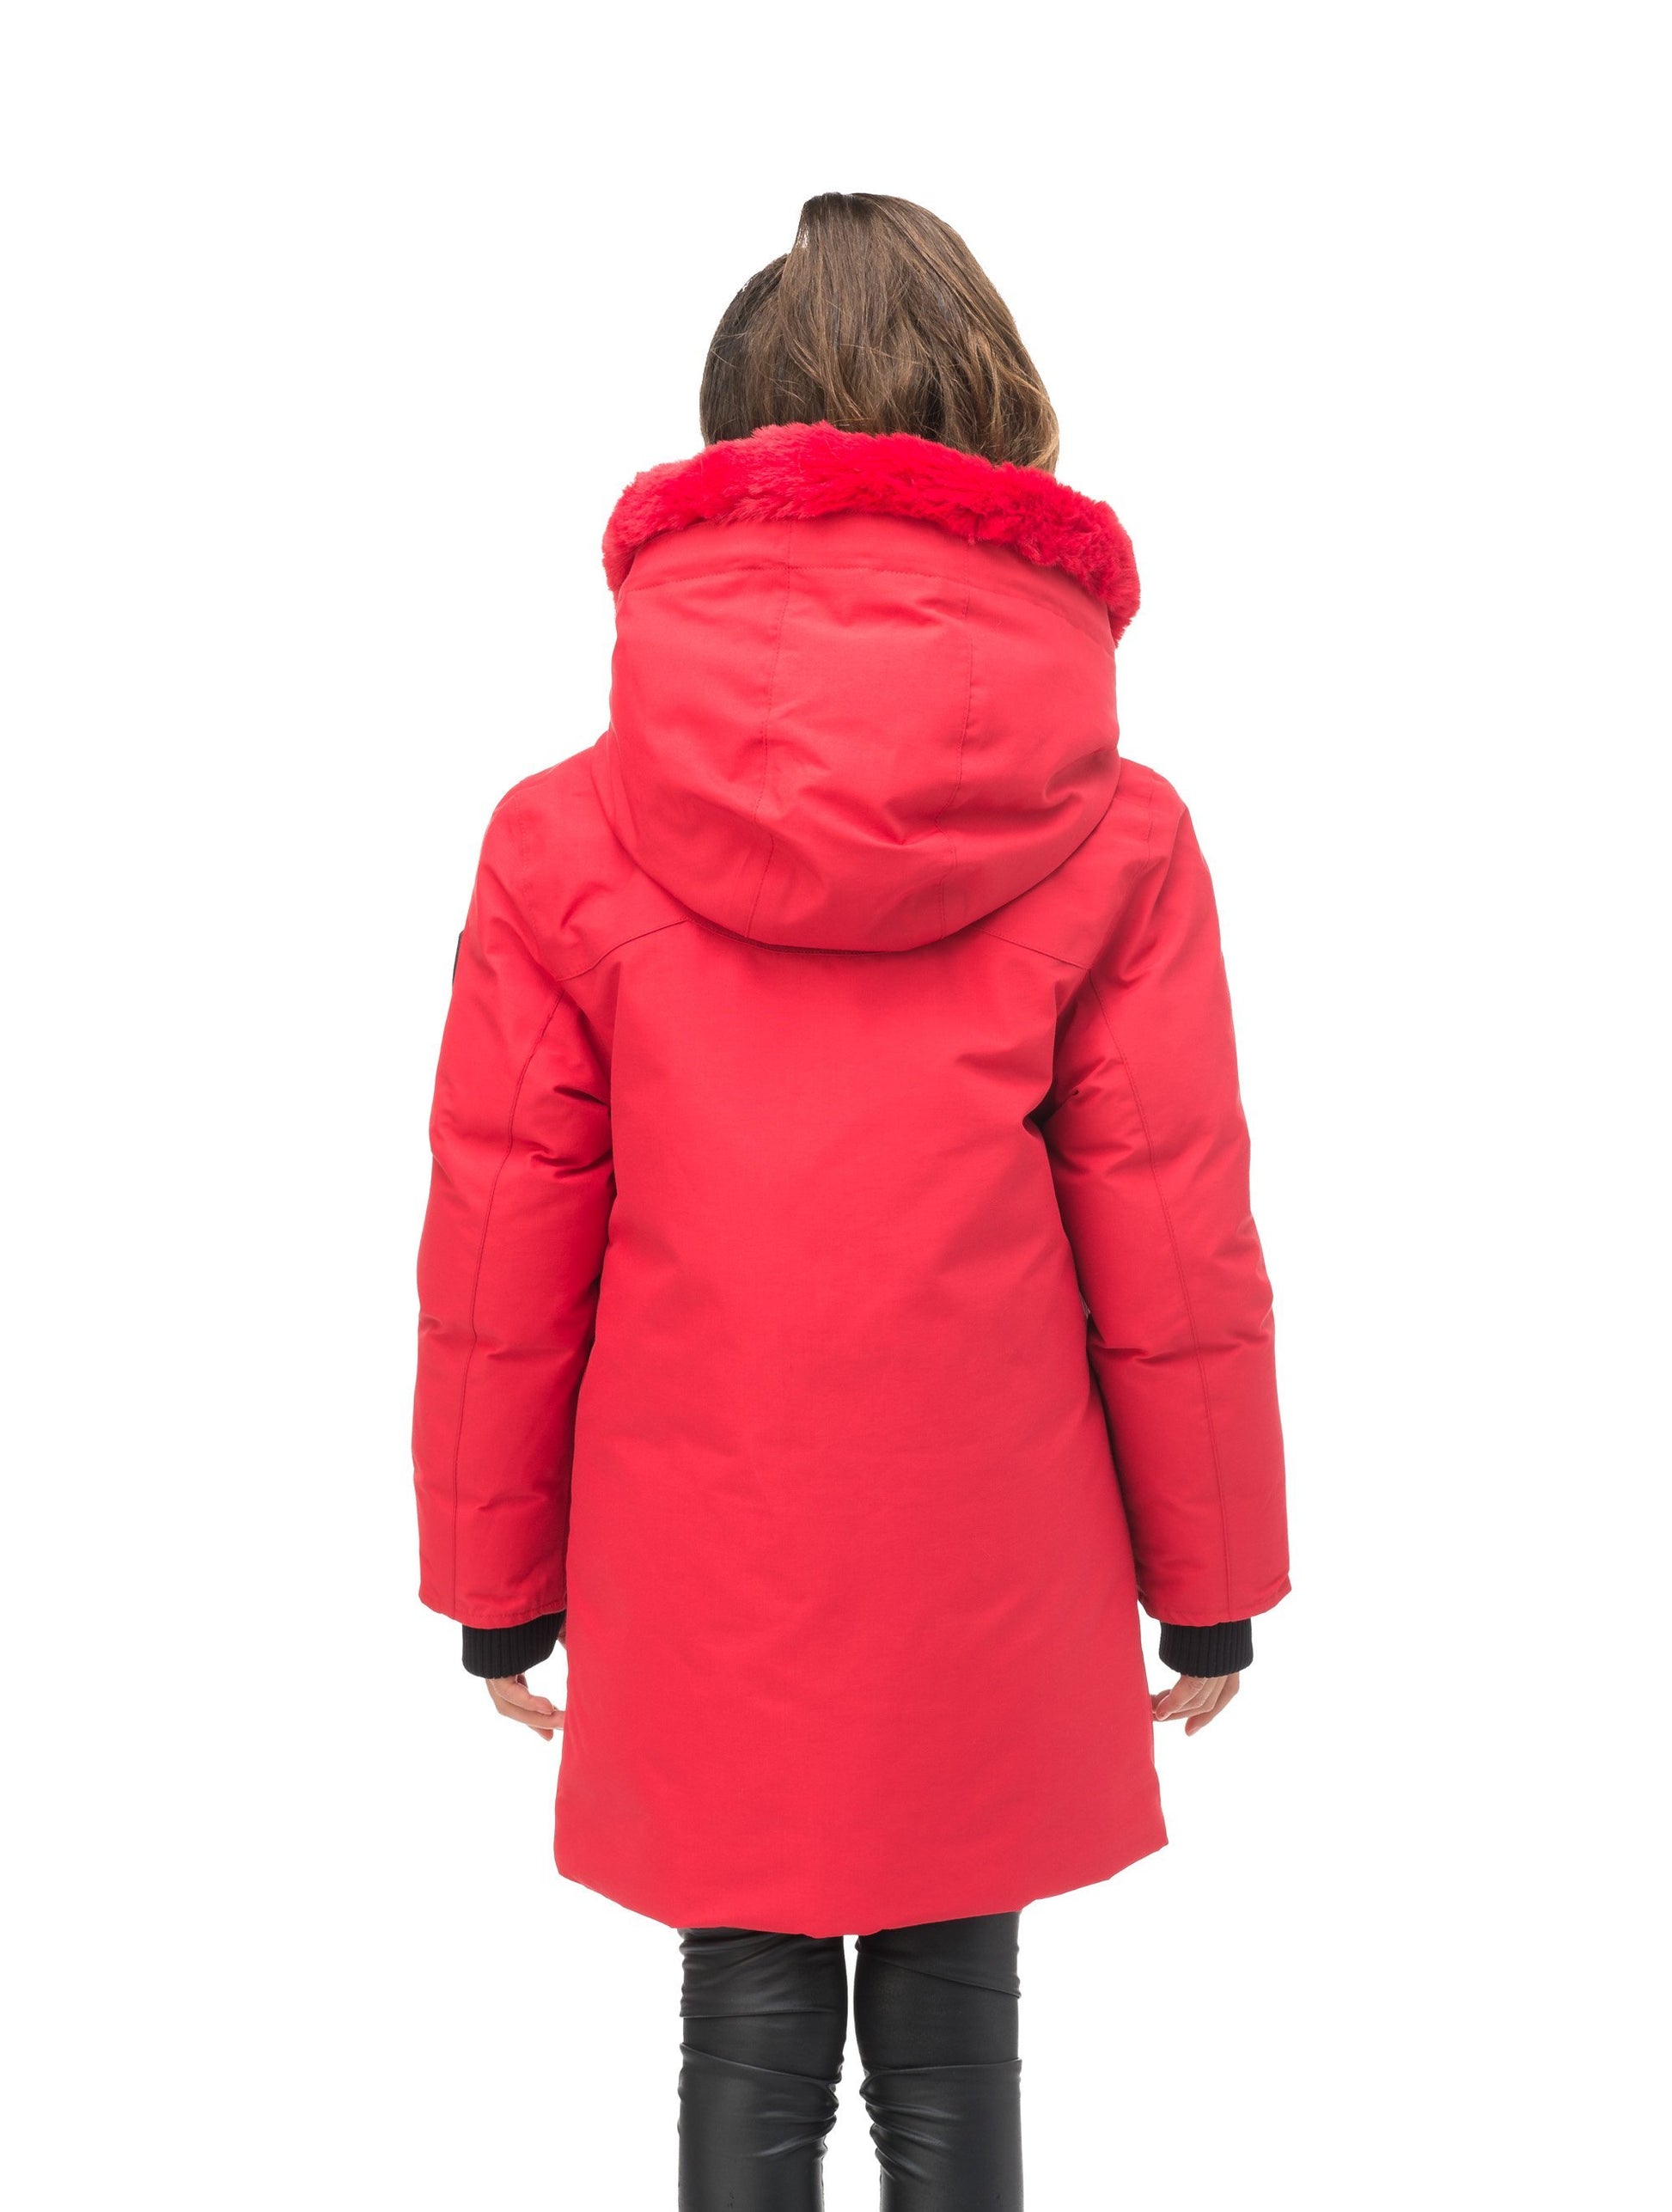 Kid's knee length down filled parka with deer applique detailing on the front patch pockets in Cy Red